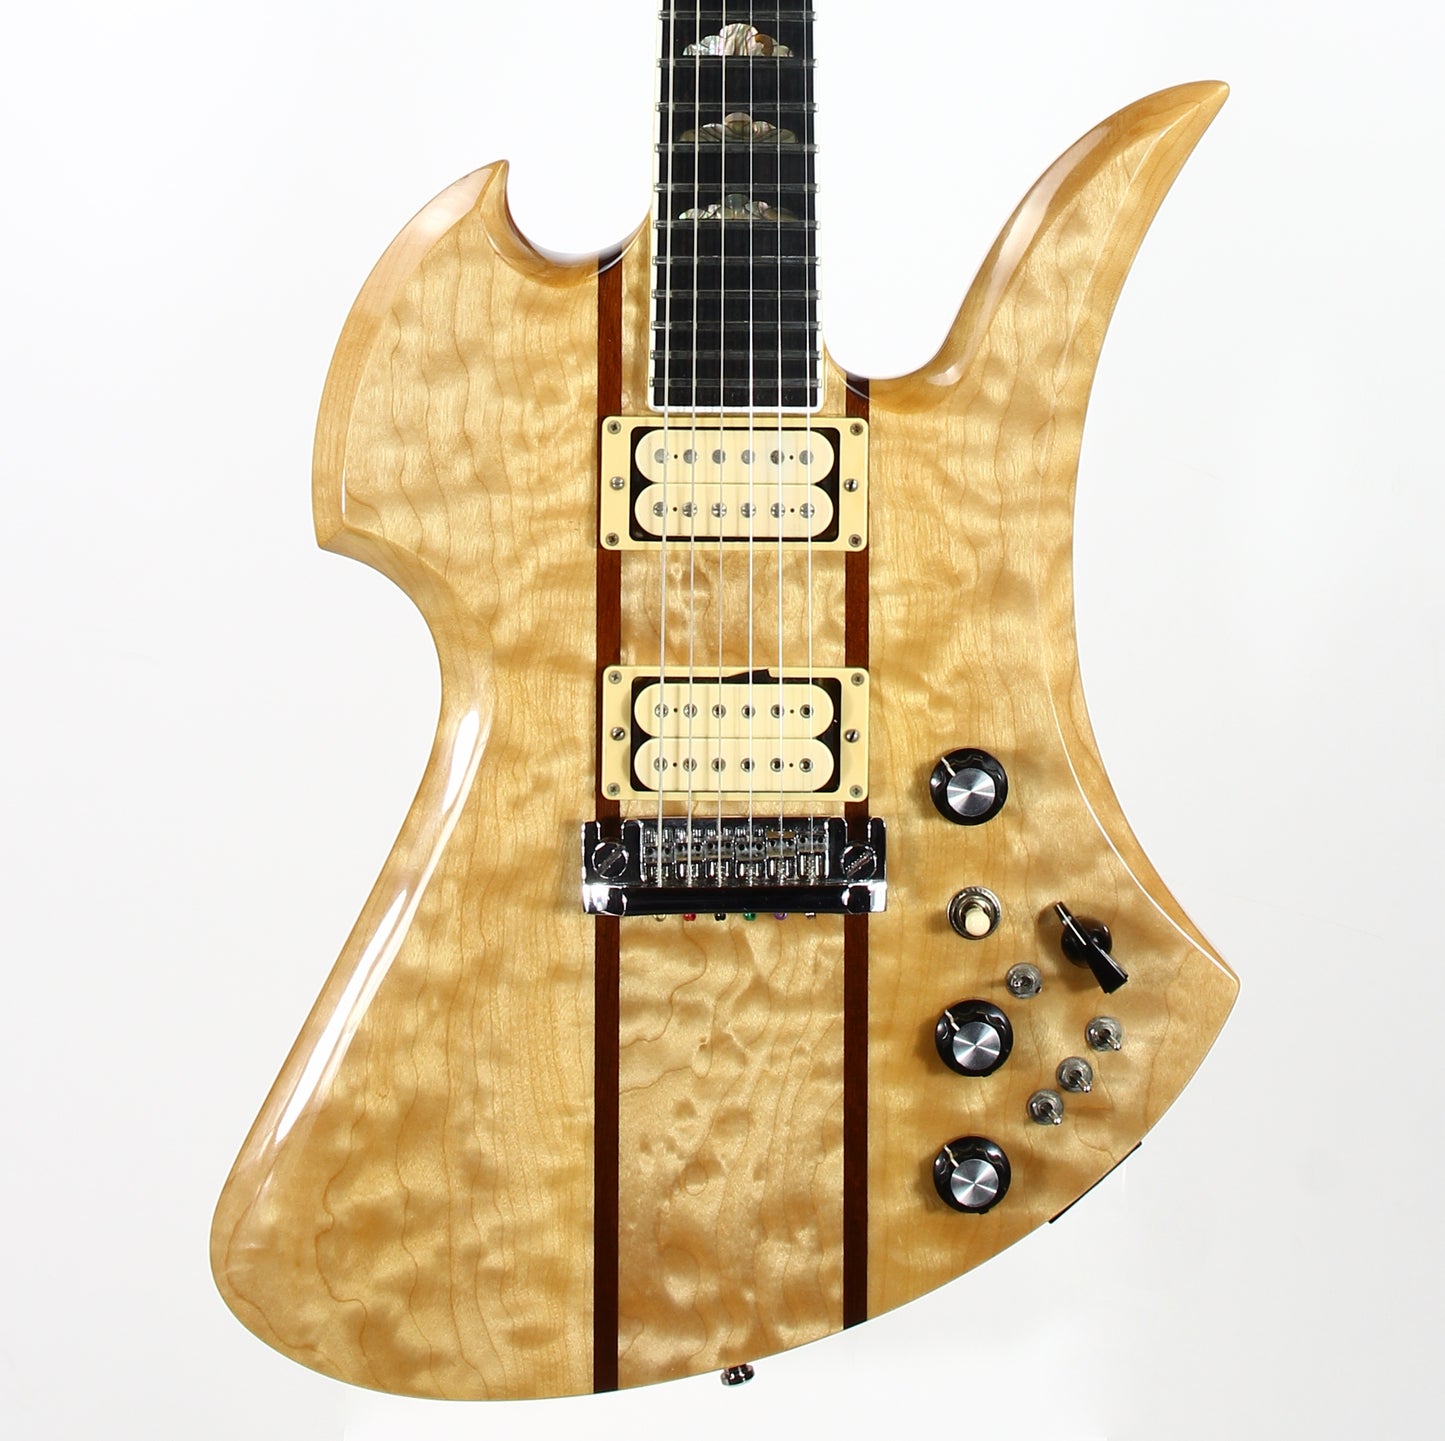 1999 BC Rich USA Mockingbird Supreme Deluxe Electric Guitar | Quilted Maple Top, Bernie Rico Signed